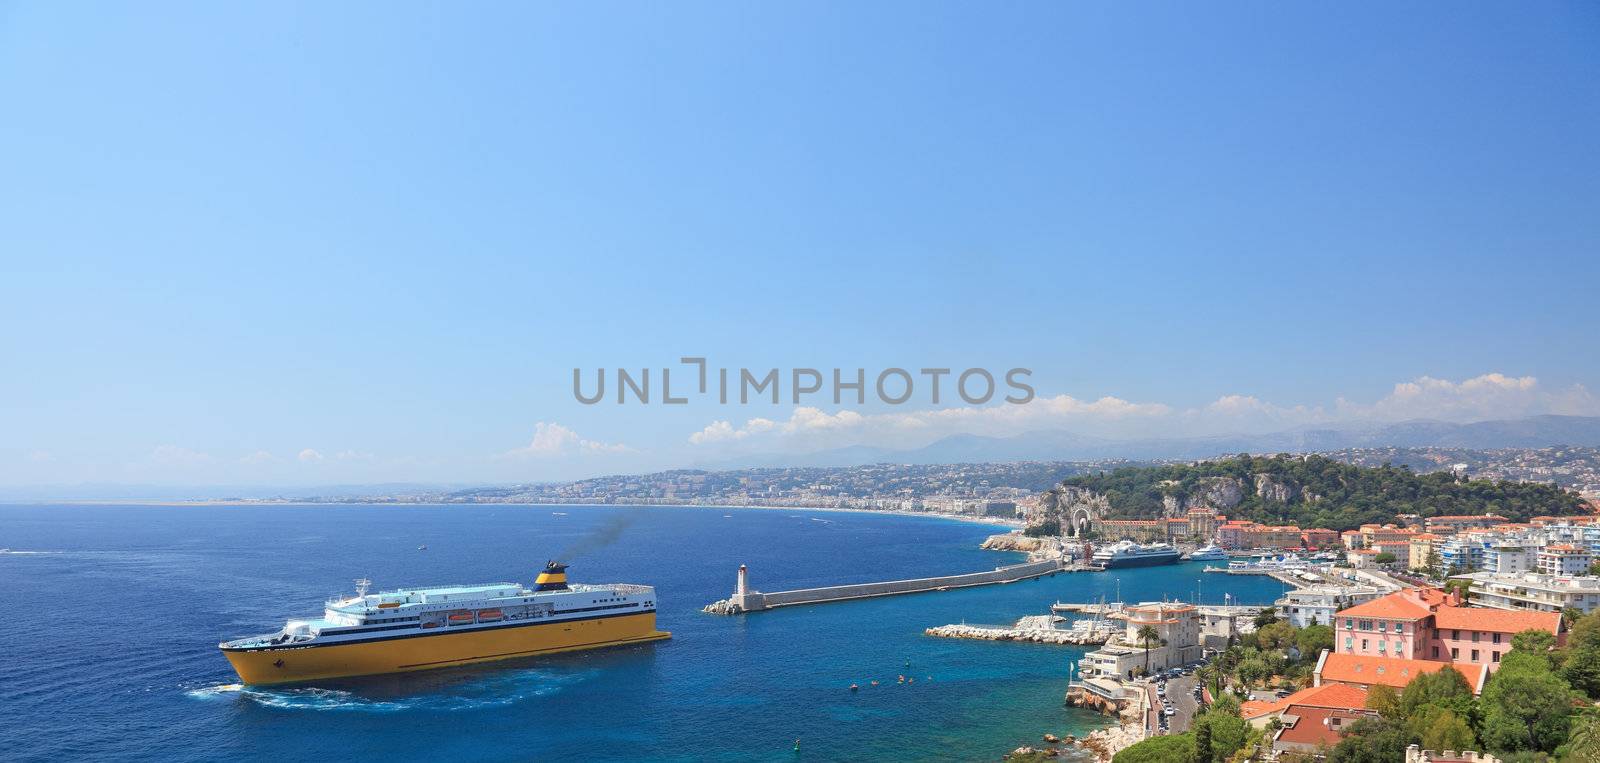 Summer view of the city of Nice and the harbor with crusie ship.